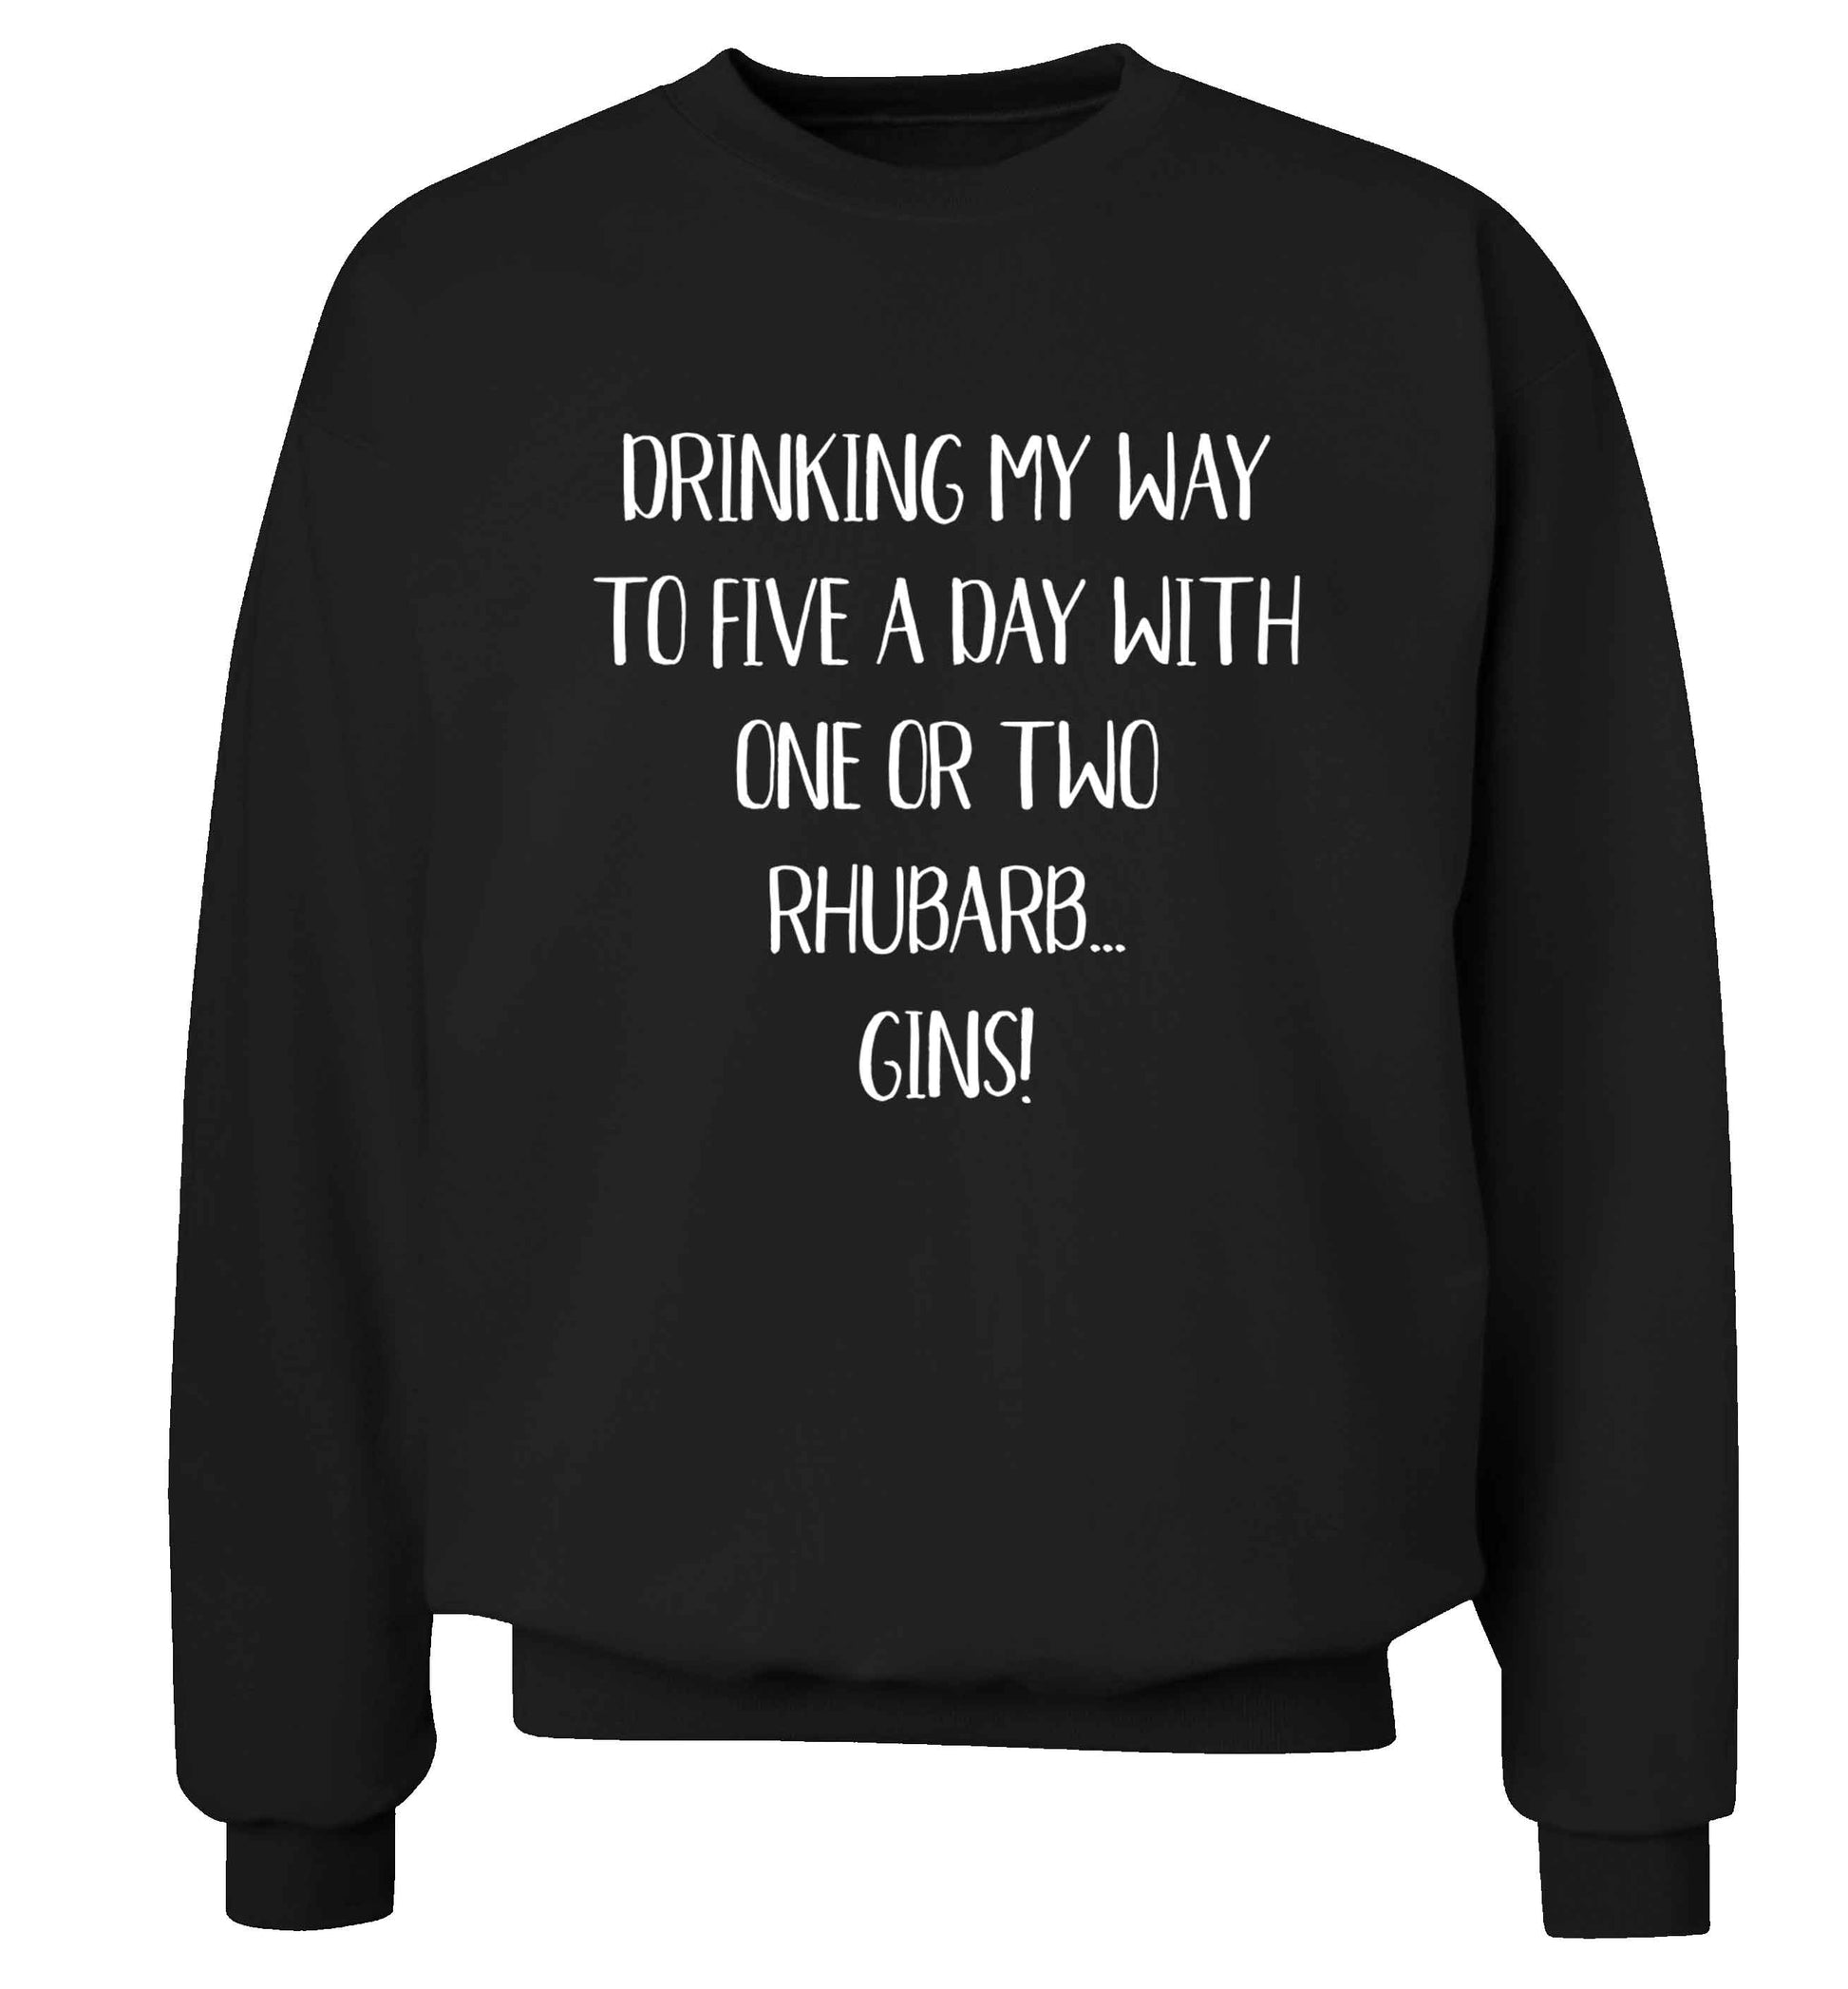 Drinking my way to five a day with one or two rhubarb gins Adult's unisex black Sweater 2XL